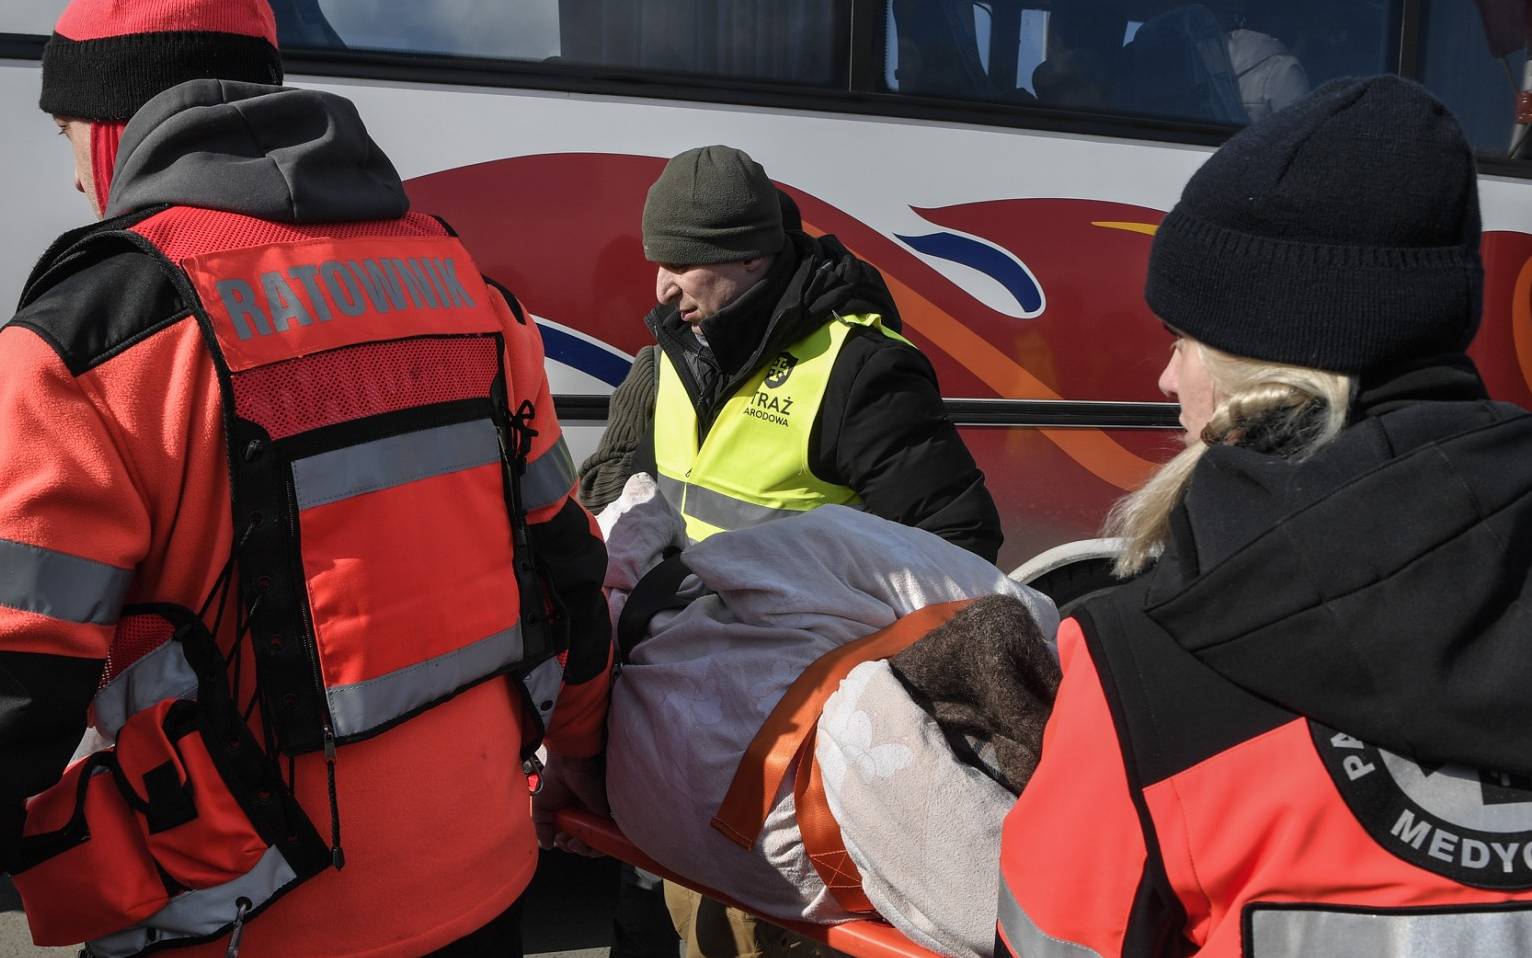 Medics carry a person after crossing the Ukrainian-Polish border at the Medyka border crossing, southeastern Poland, on March 10, 2022. - The UN says at least 2.2 million people have fled Ukraine, with more than half now in Poland. It has called the exodus Europe's fastest-growing refugee crisis since World War II. (Photo by Louisa GOULIAMAKI / AFP)